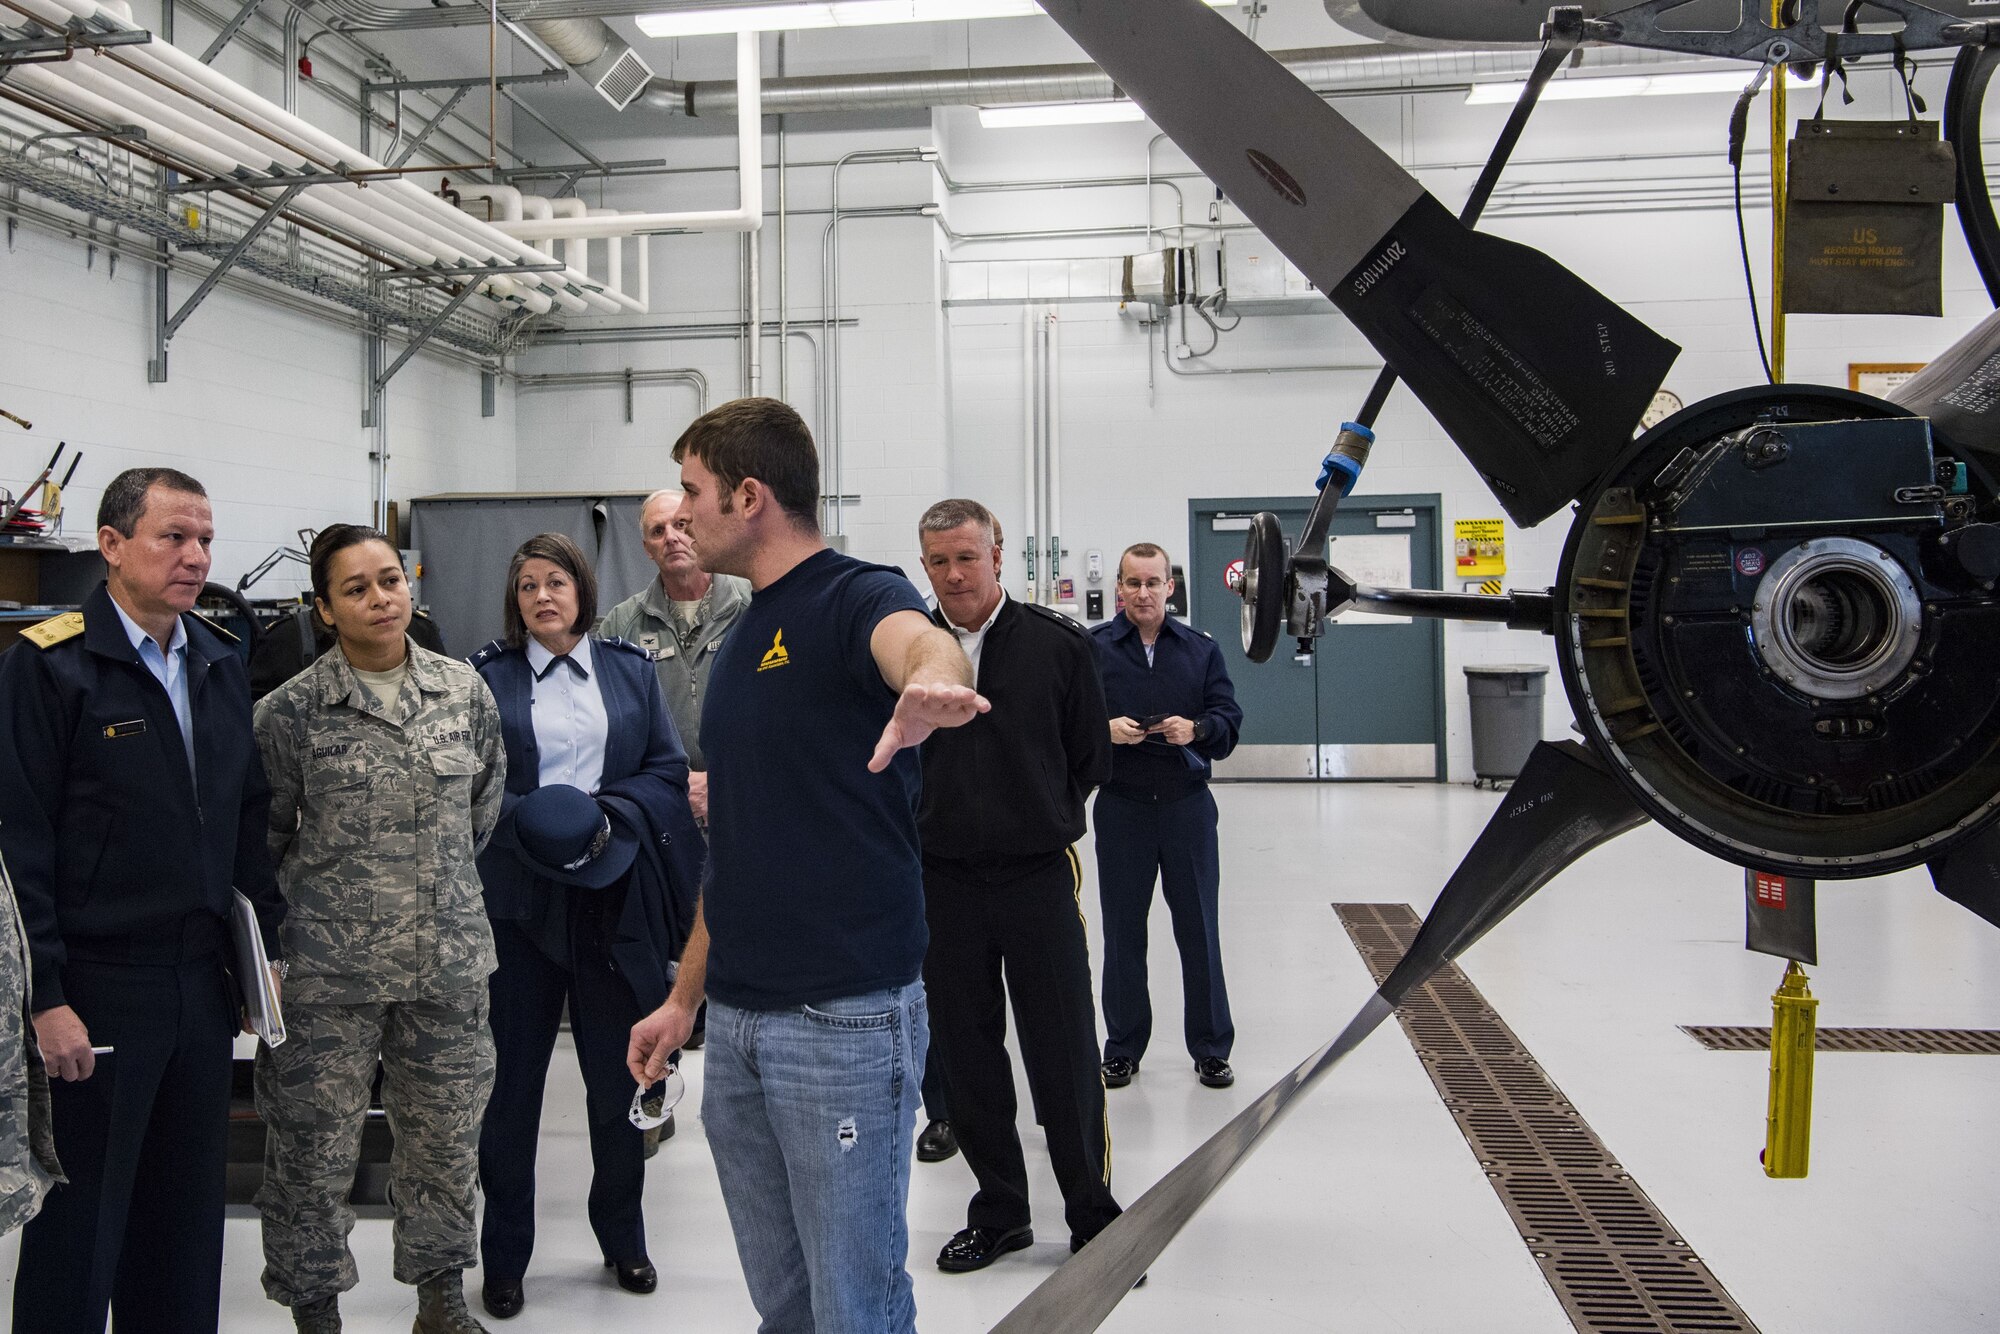 Tim Sayre, a contractor for the 130th Airlift Wing’s Engine Regional Repair Center, explains the engine rebuild program to Peruvian Air Force Maj. Gen. Gregorio C. Mendiola, Assistant Defense and Air Attaché for the Embassy of Peru, Nov. 21, 2017 at McLaughlin Air National Guard Base, Charleston, W.Va. Mendiola visited the 130th Airlift Wing to see first hand the domestic response capabilities of Air National Guard assets at the wing including the C-130H and aeromedical evacuation mission. The work of the 130th AW Engine Regional Repair Center helps to save more than $500,000 per engine by rebuilding and repairing or overhauling C-130H engines and propellors locally. (U.S. Air National Guard Photo by Airman Caleb Vance)